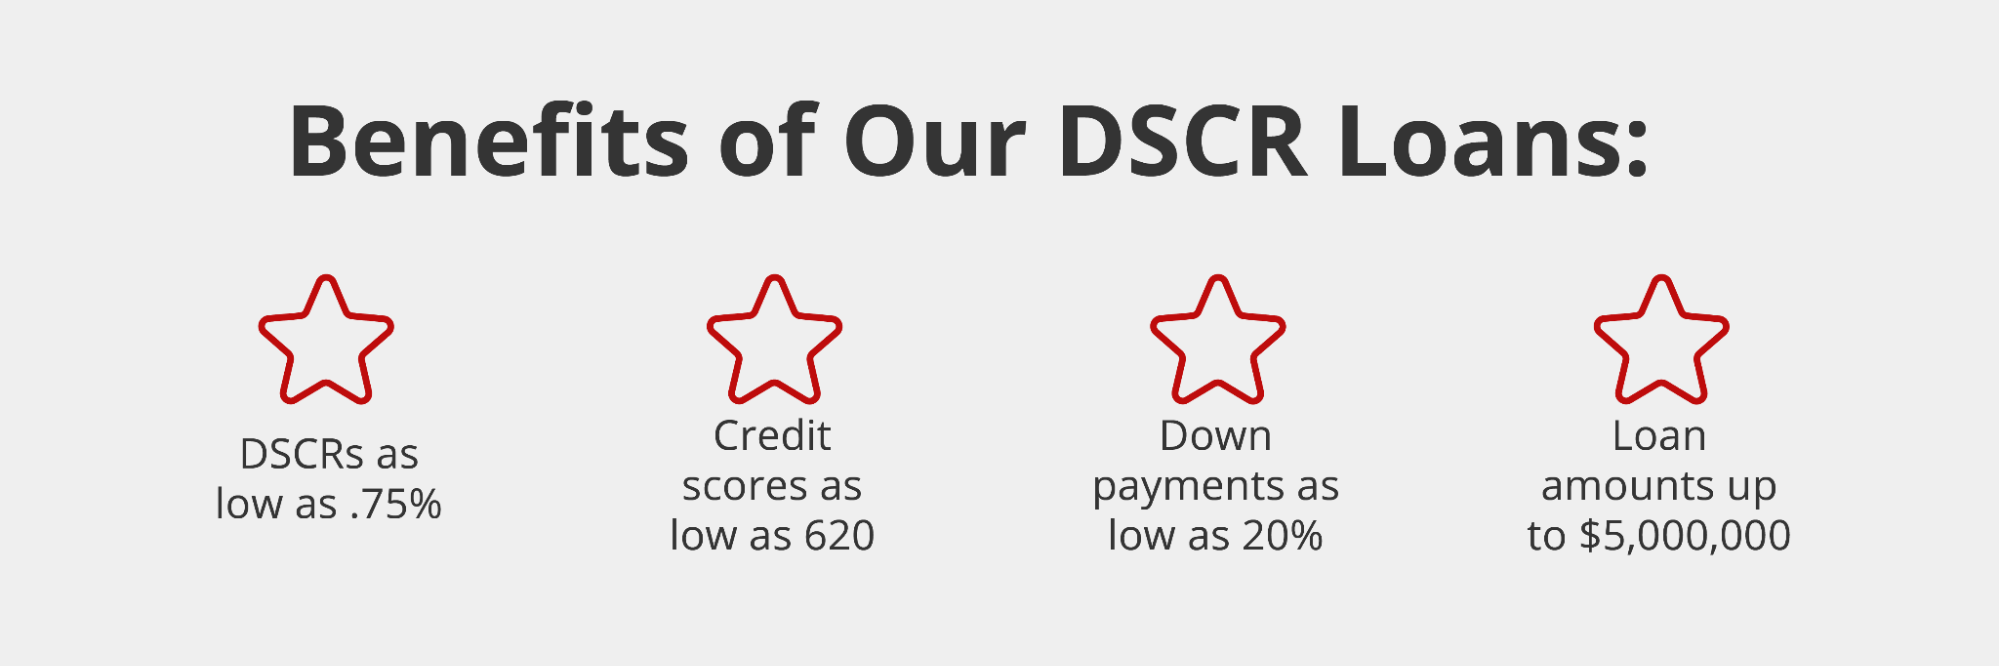 Graphic featuring four stars and text that reads, “Benefits of Our DSCR Loans: DSCRs as low as .75%; Credit scores as low as 620; Down payments as low as 20%; Loan amounts up to $5,000,000”.